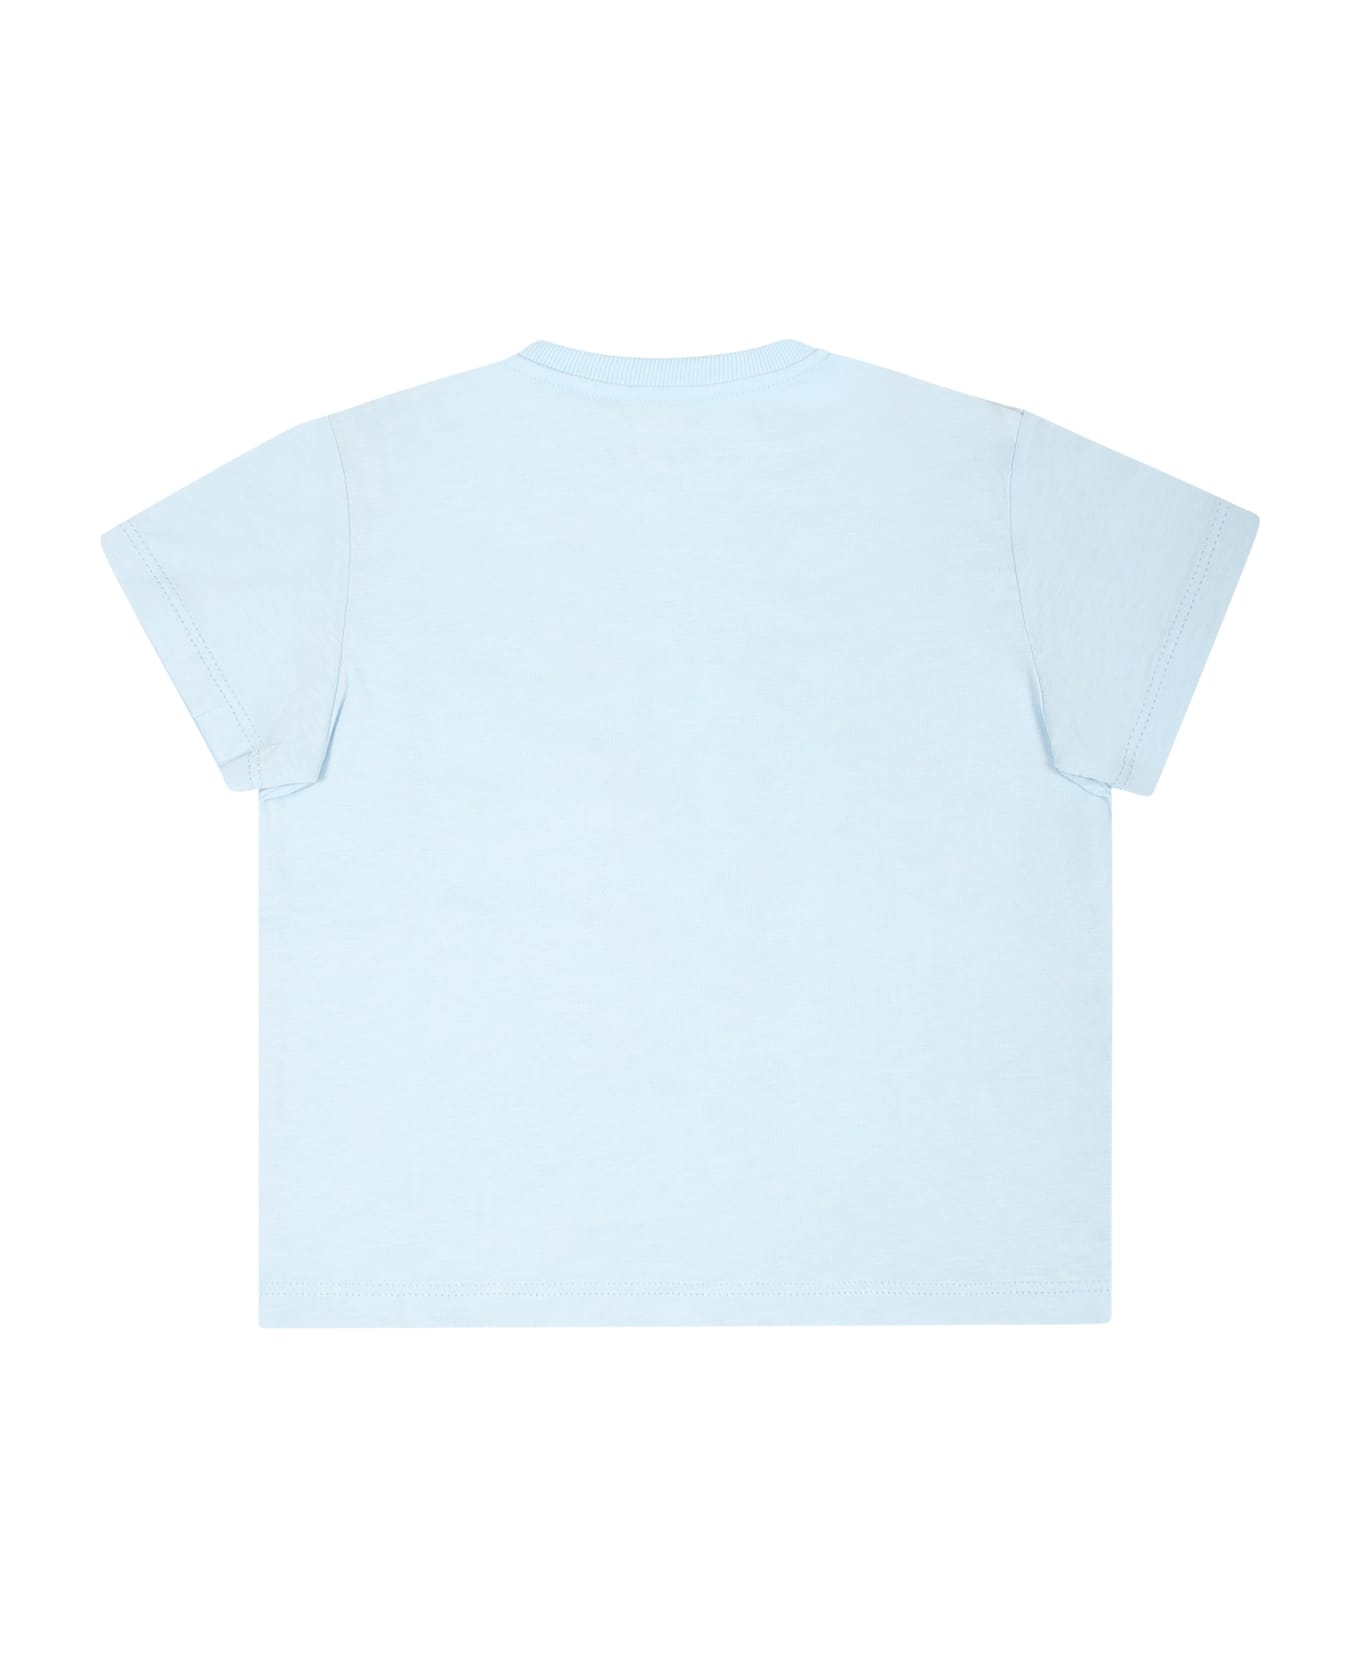 Moschino Light Blue T-shirt For Baby Boy With Teddy Bear And Cactus - Light Blue Tシャツ＆ポロシャツ